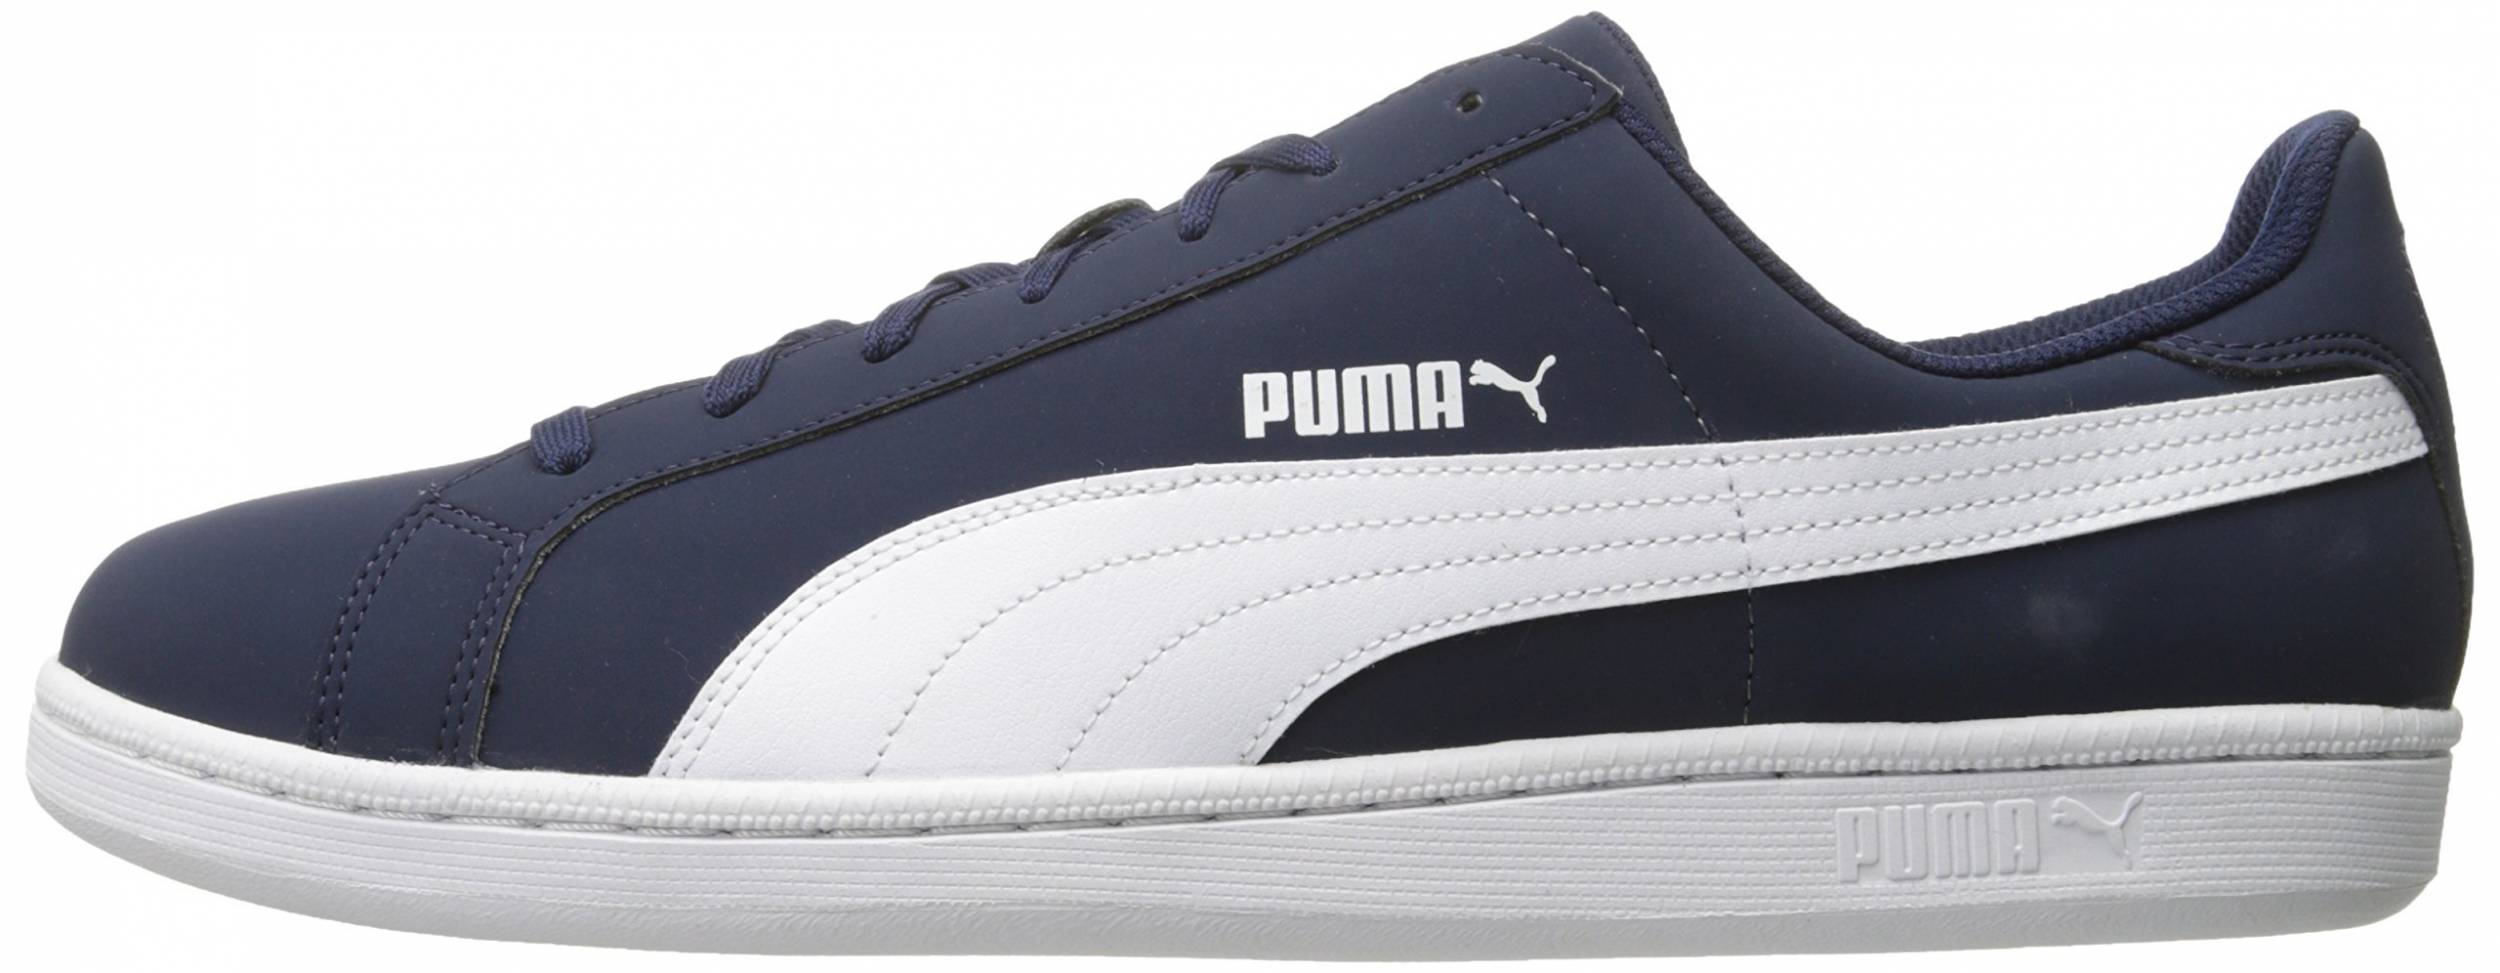 Only $50 + Review of Puma Smash Buck 